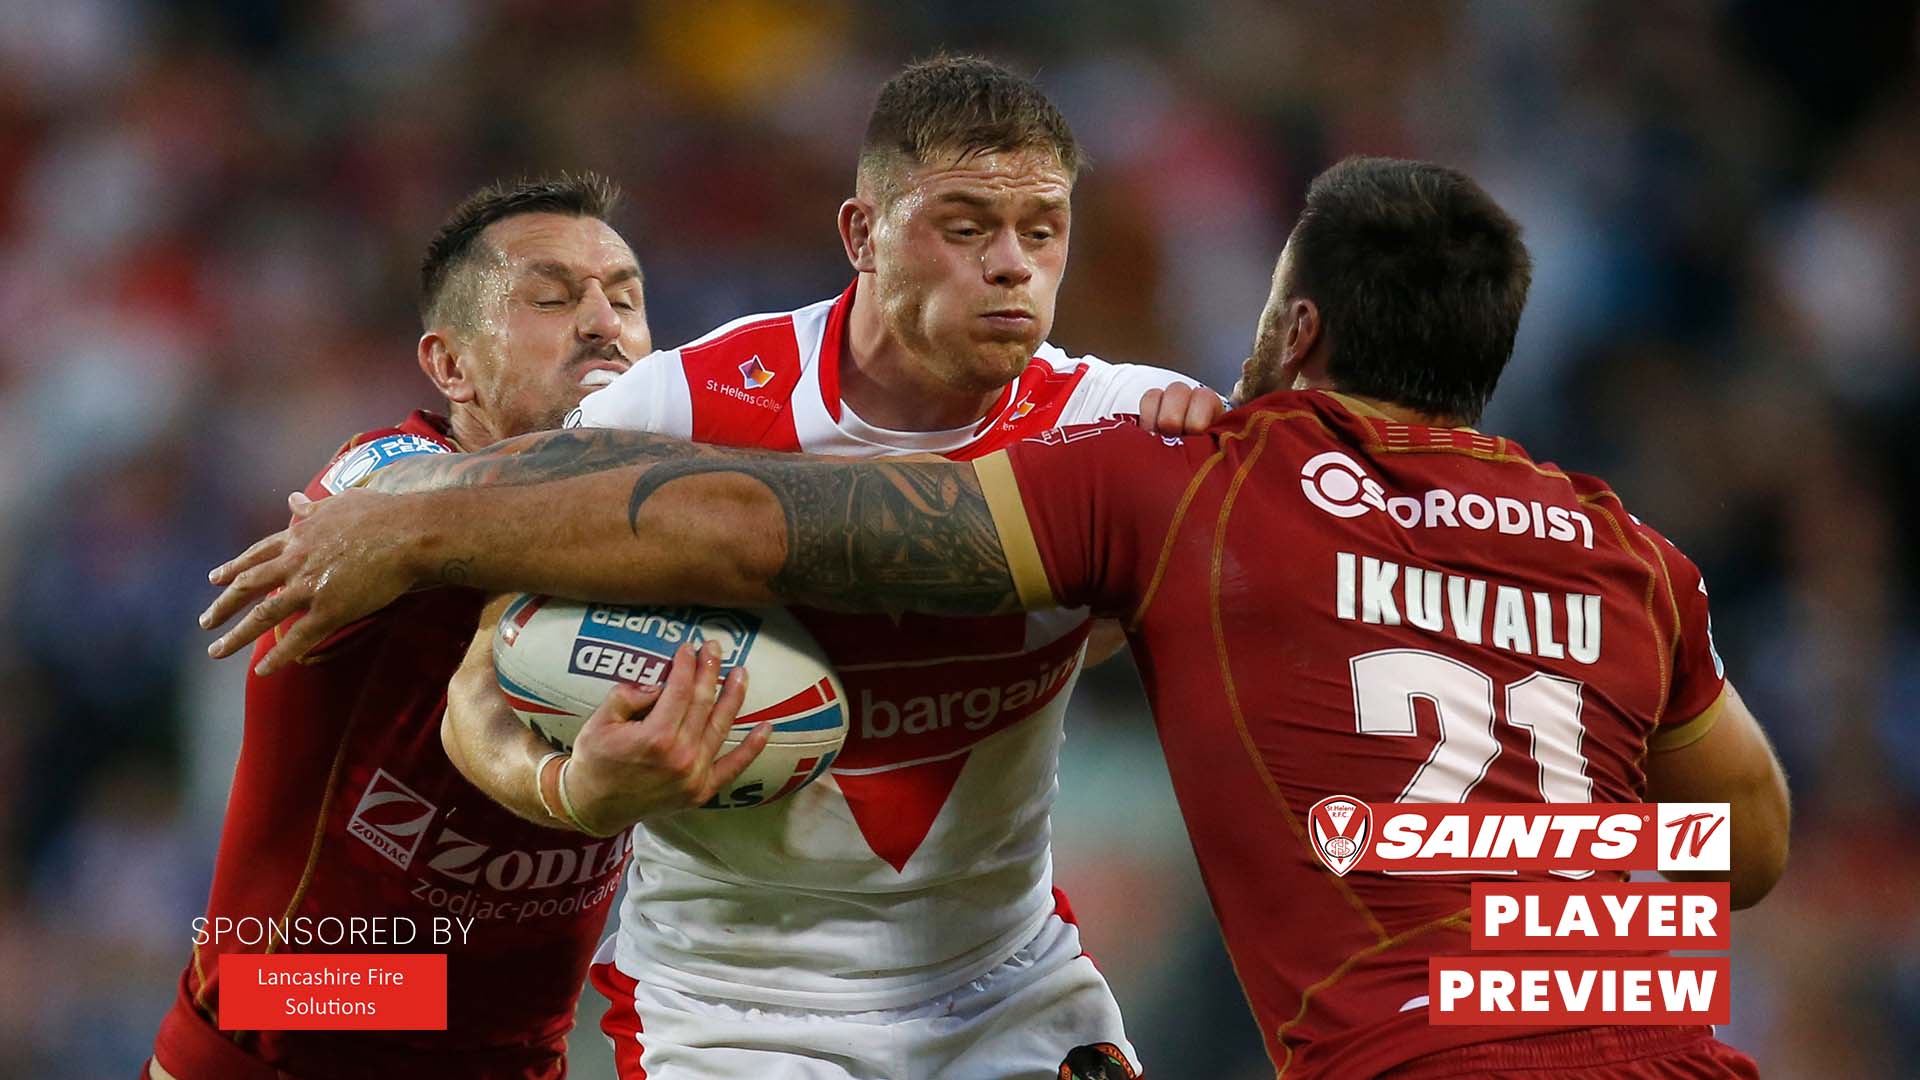 Saints TV Morgan Knowles on exciting finish to the season against Hull FC St.Helens R.F.C.